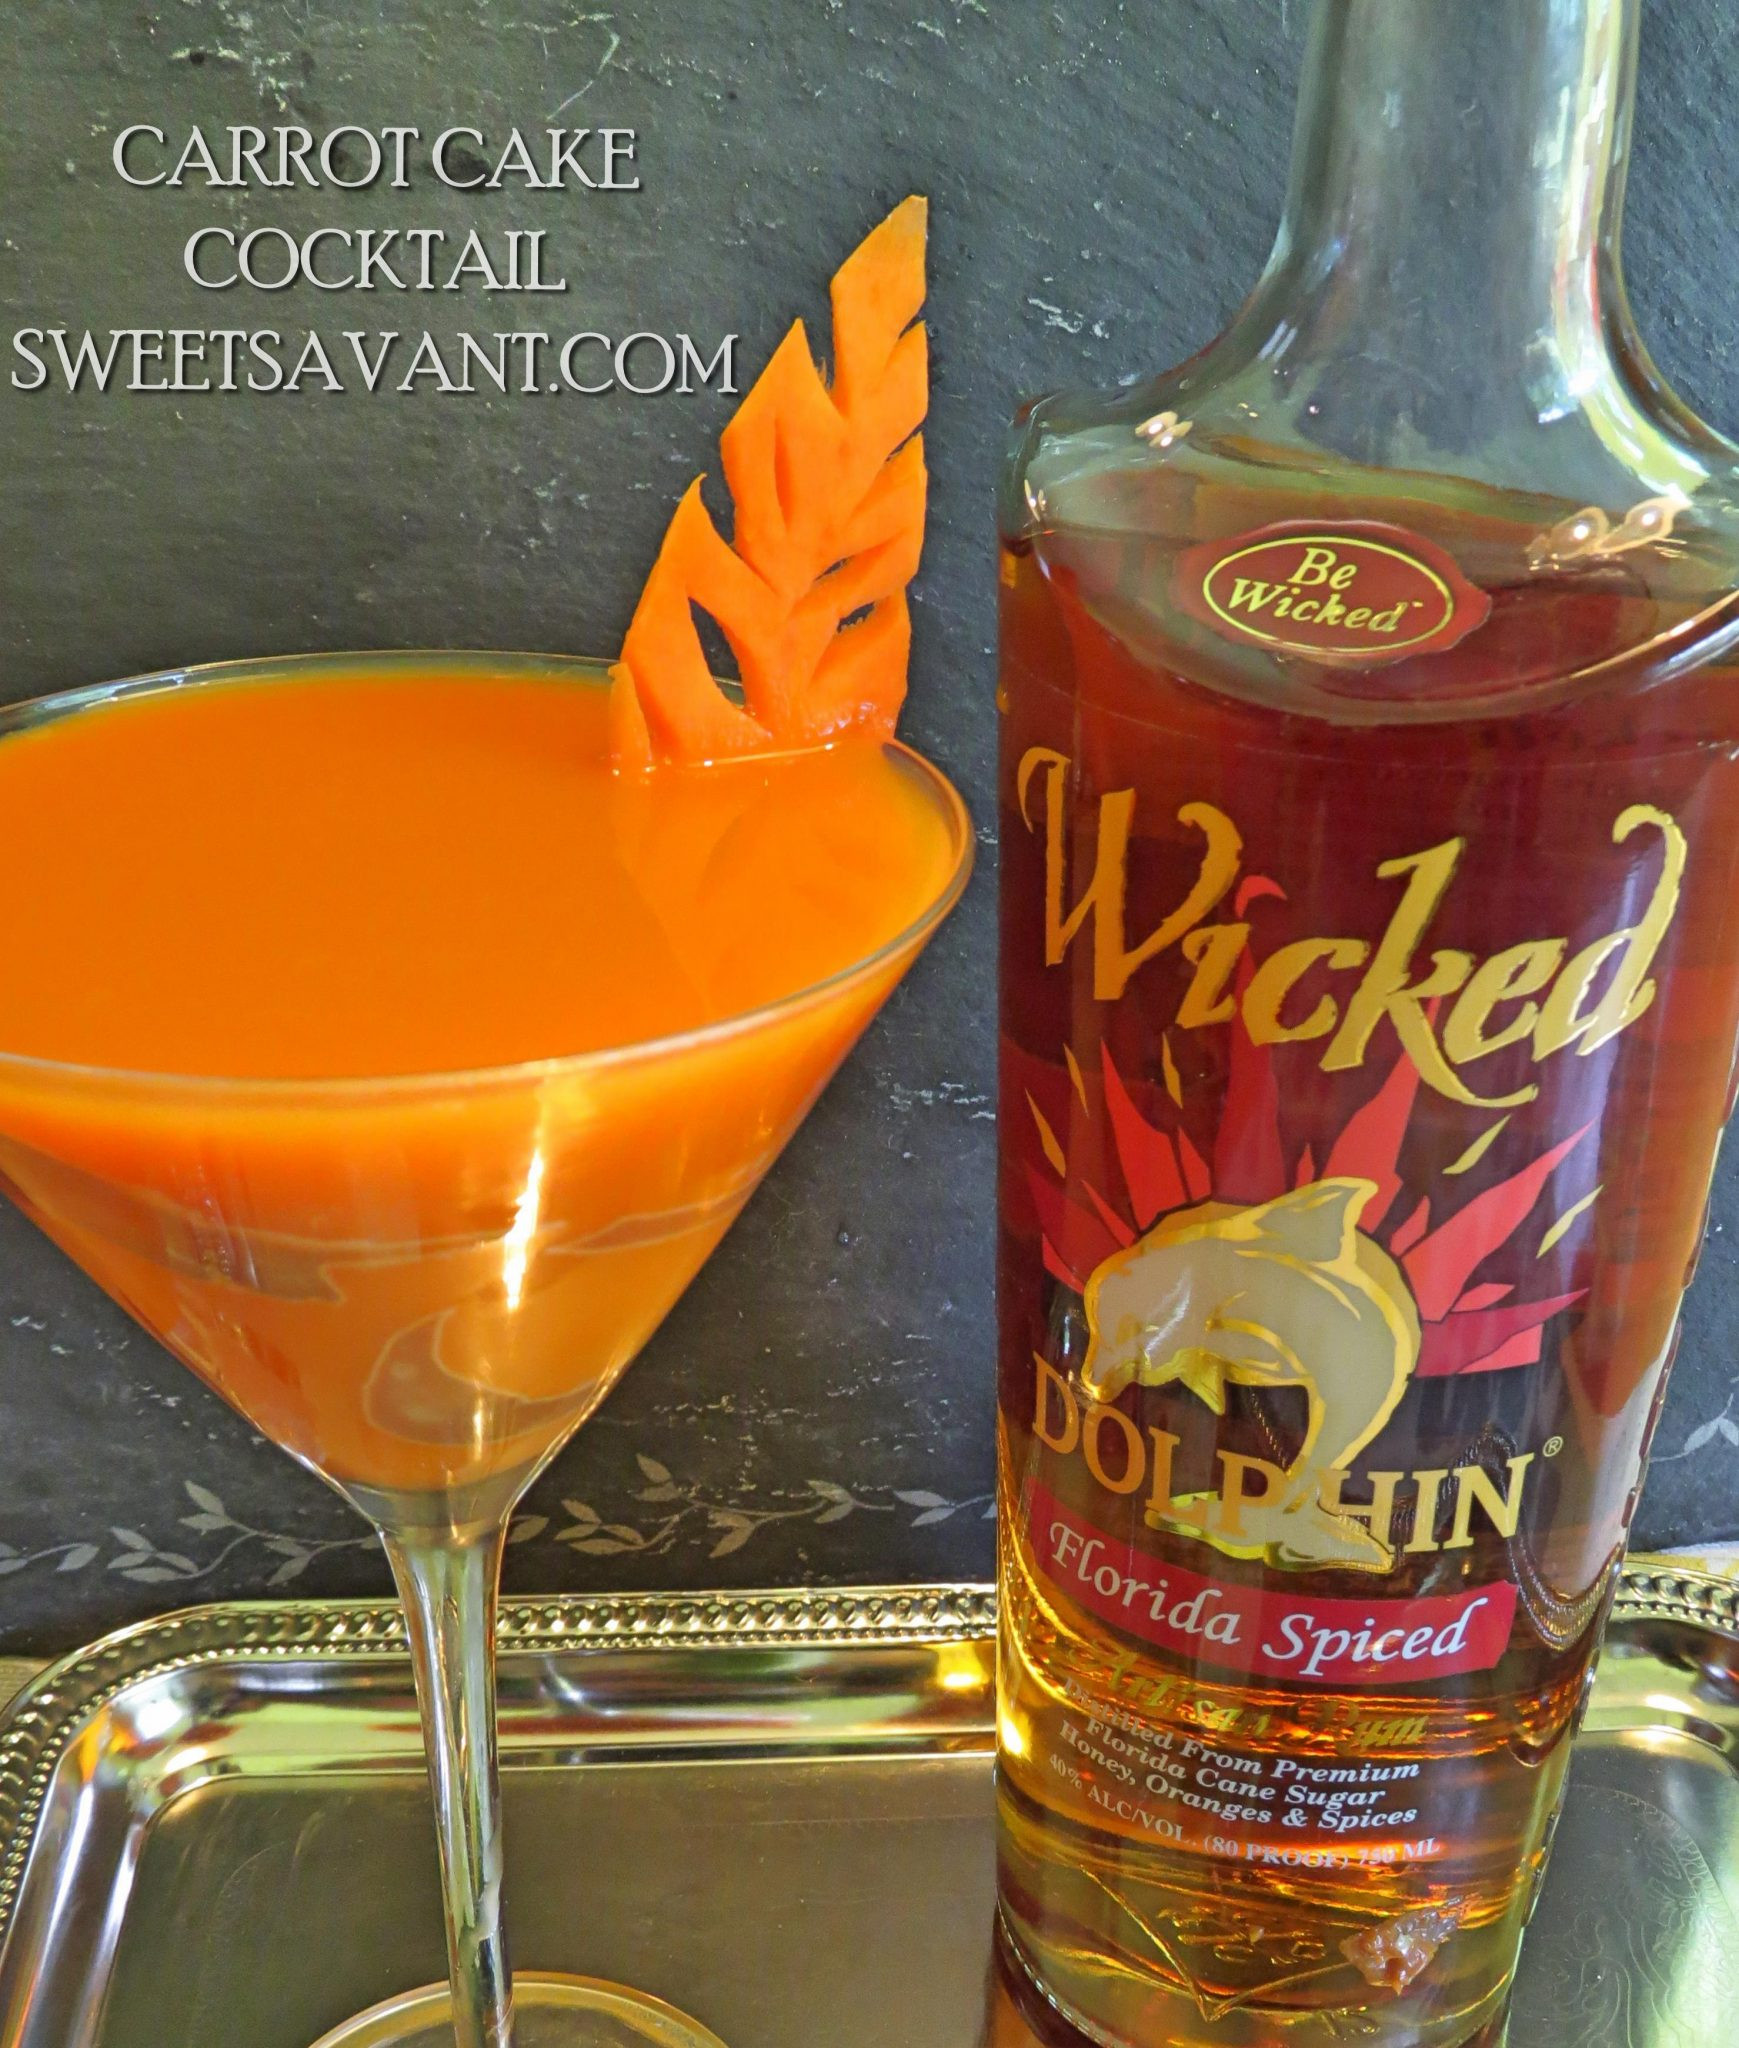 Carrot Cake Cocktail
 Carrot Cake Punch with Wicked Dolphin Spiced Rum